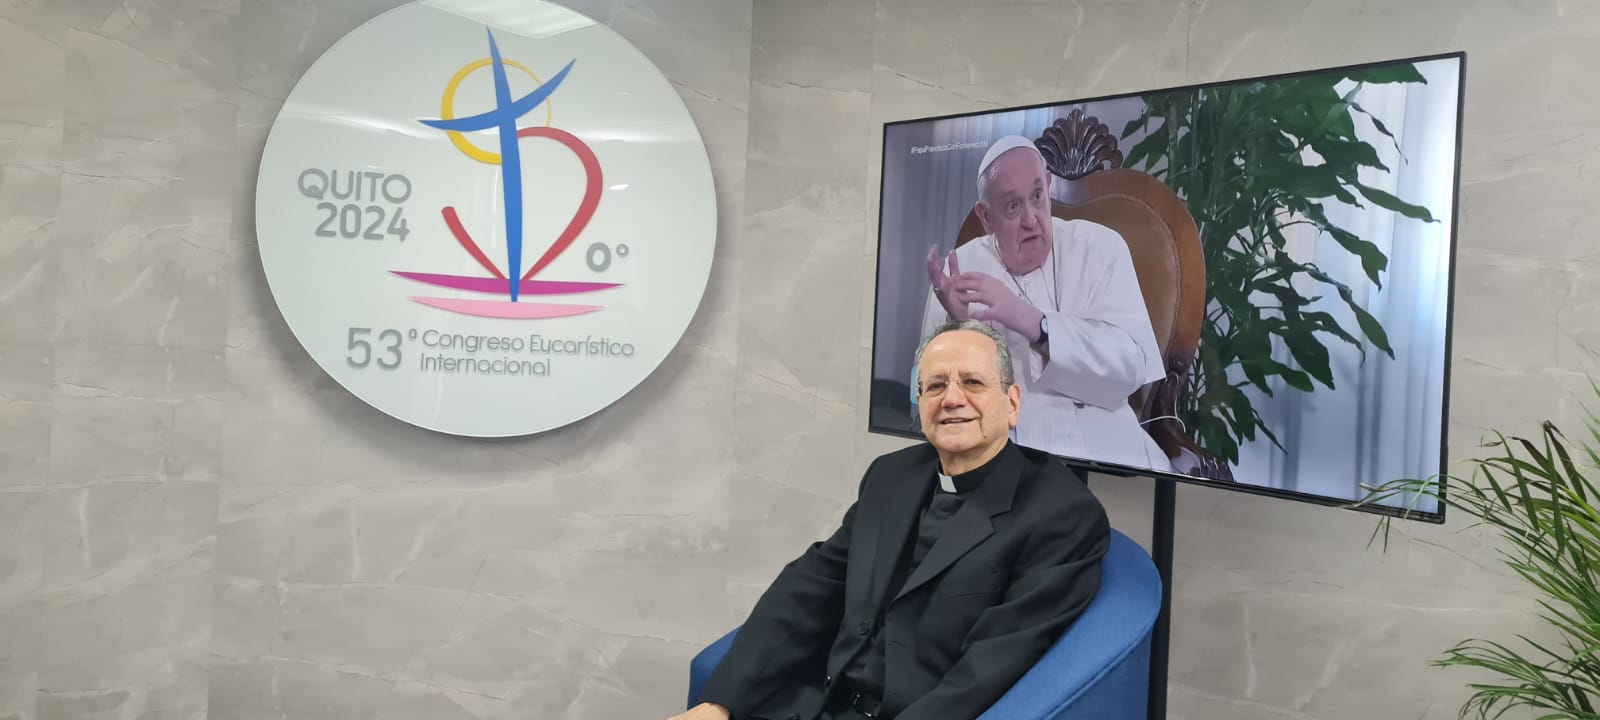 President of the Pontifical Committee for International Eucharistic Congresses visits Ecuador